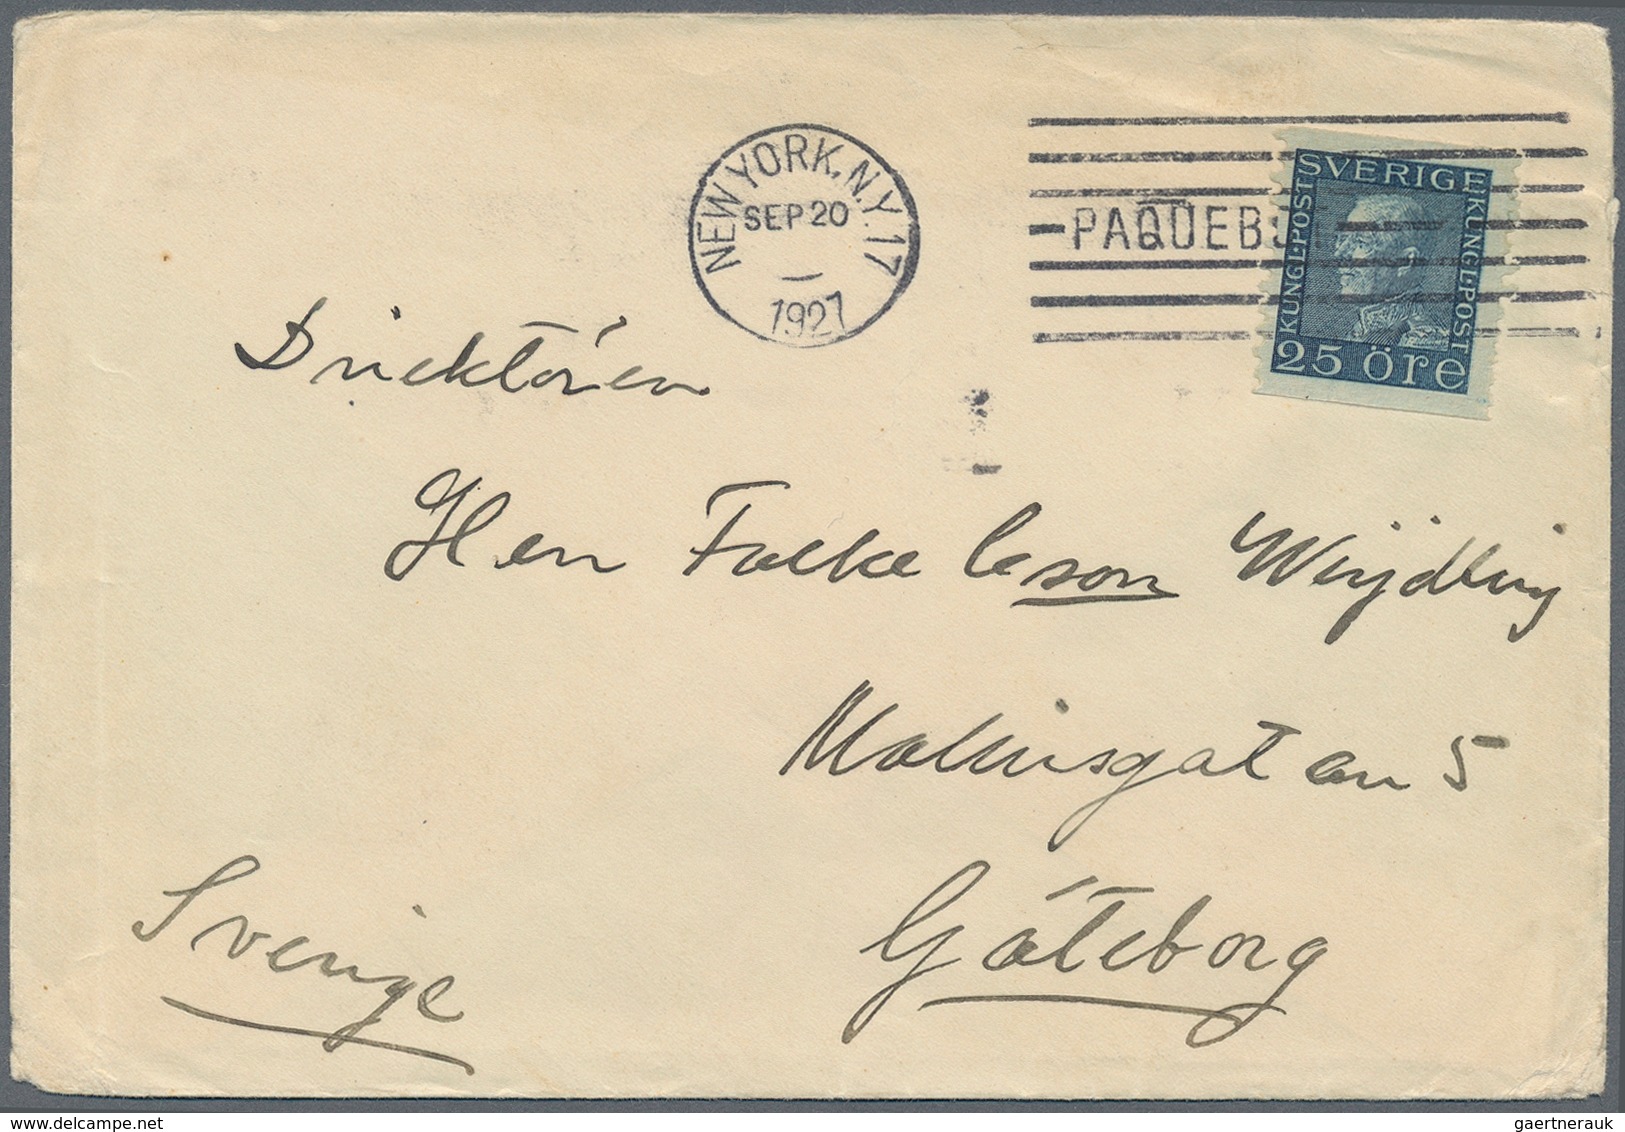 Schweden - Stempel: 1845/1957, Collection of about 36 letters/cards, nearly all with ship-post cance